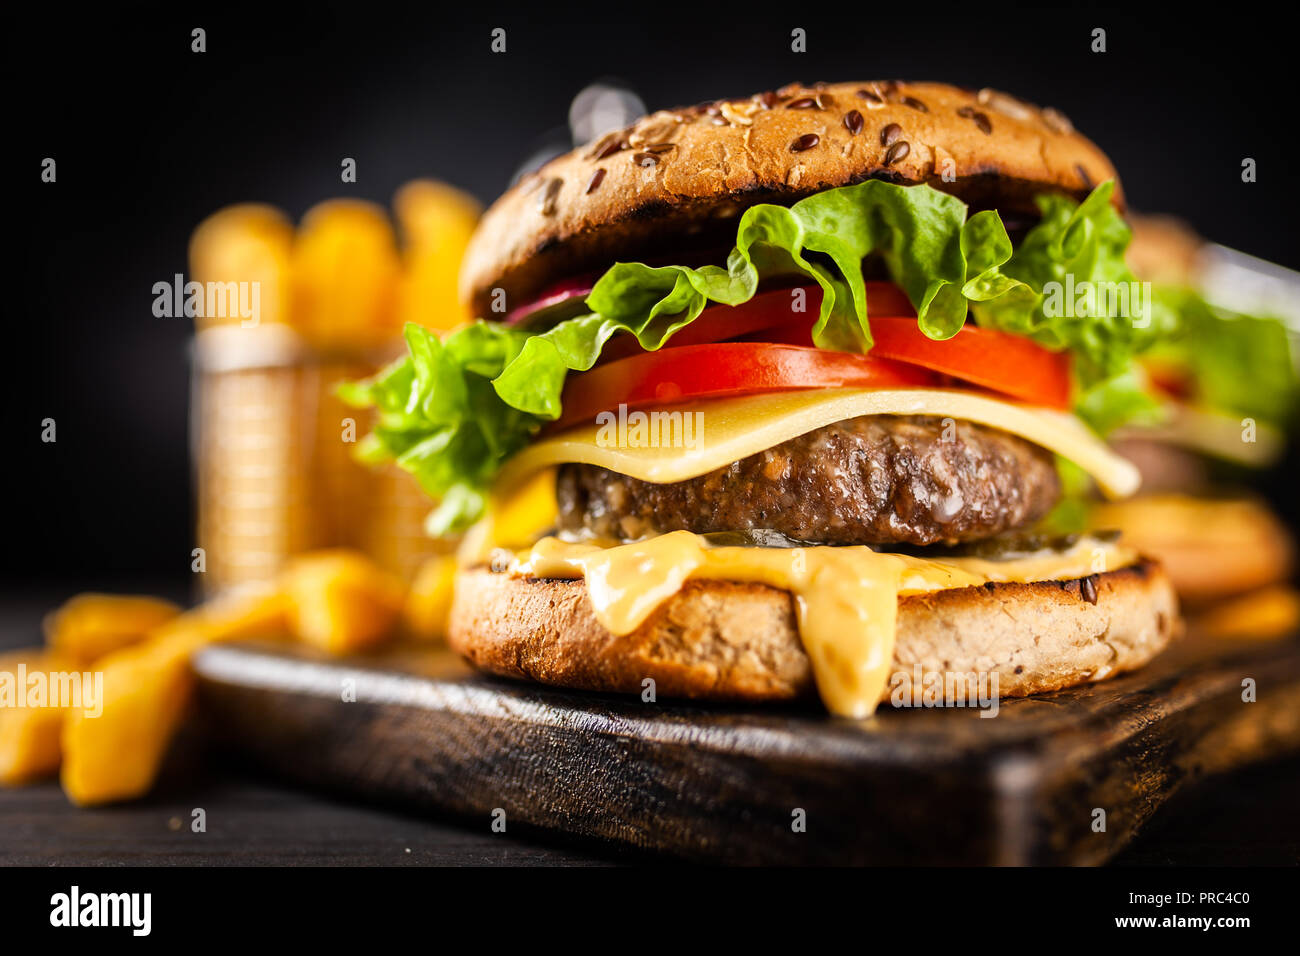 Delicious grilled burgers Stock Photo